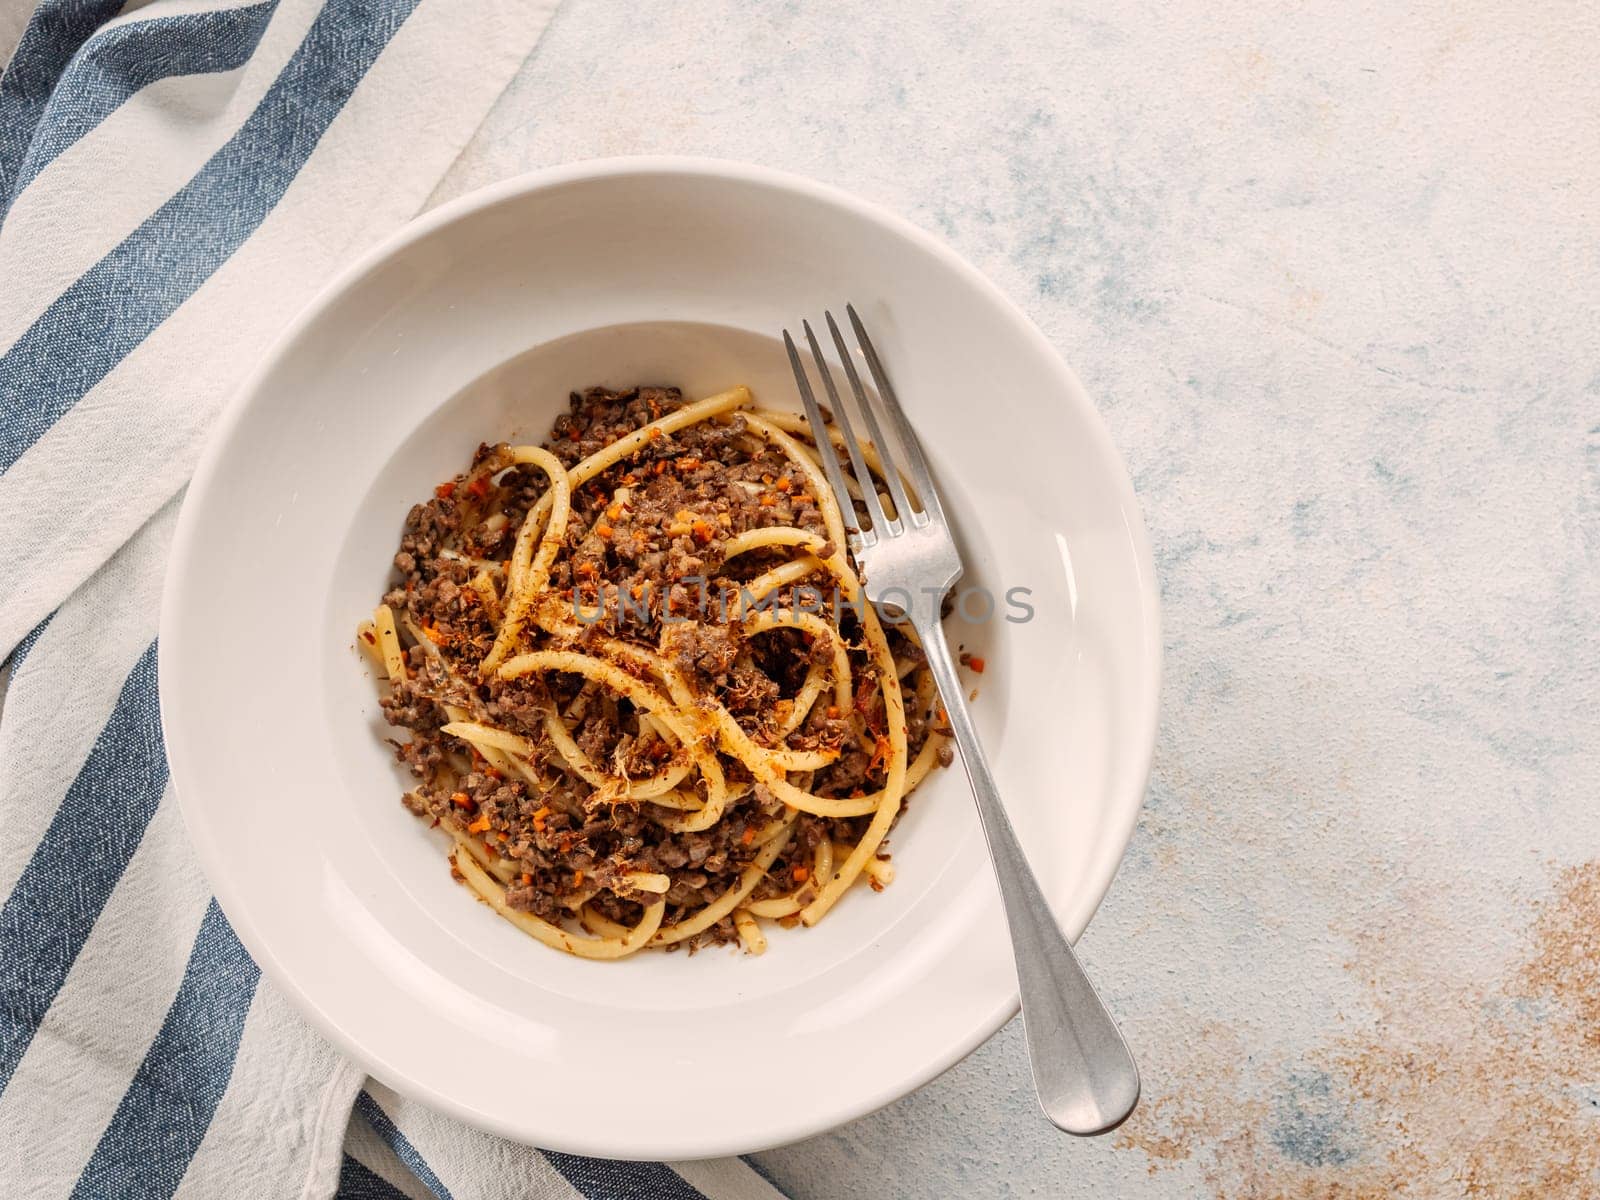 Spaghetti with minced meat by fascinadora